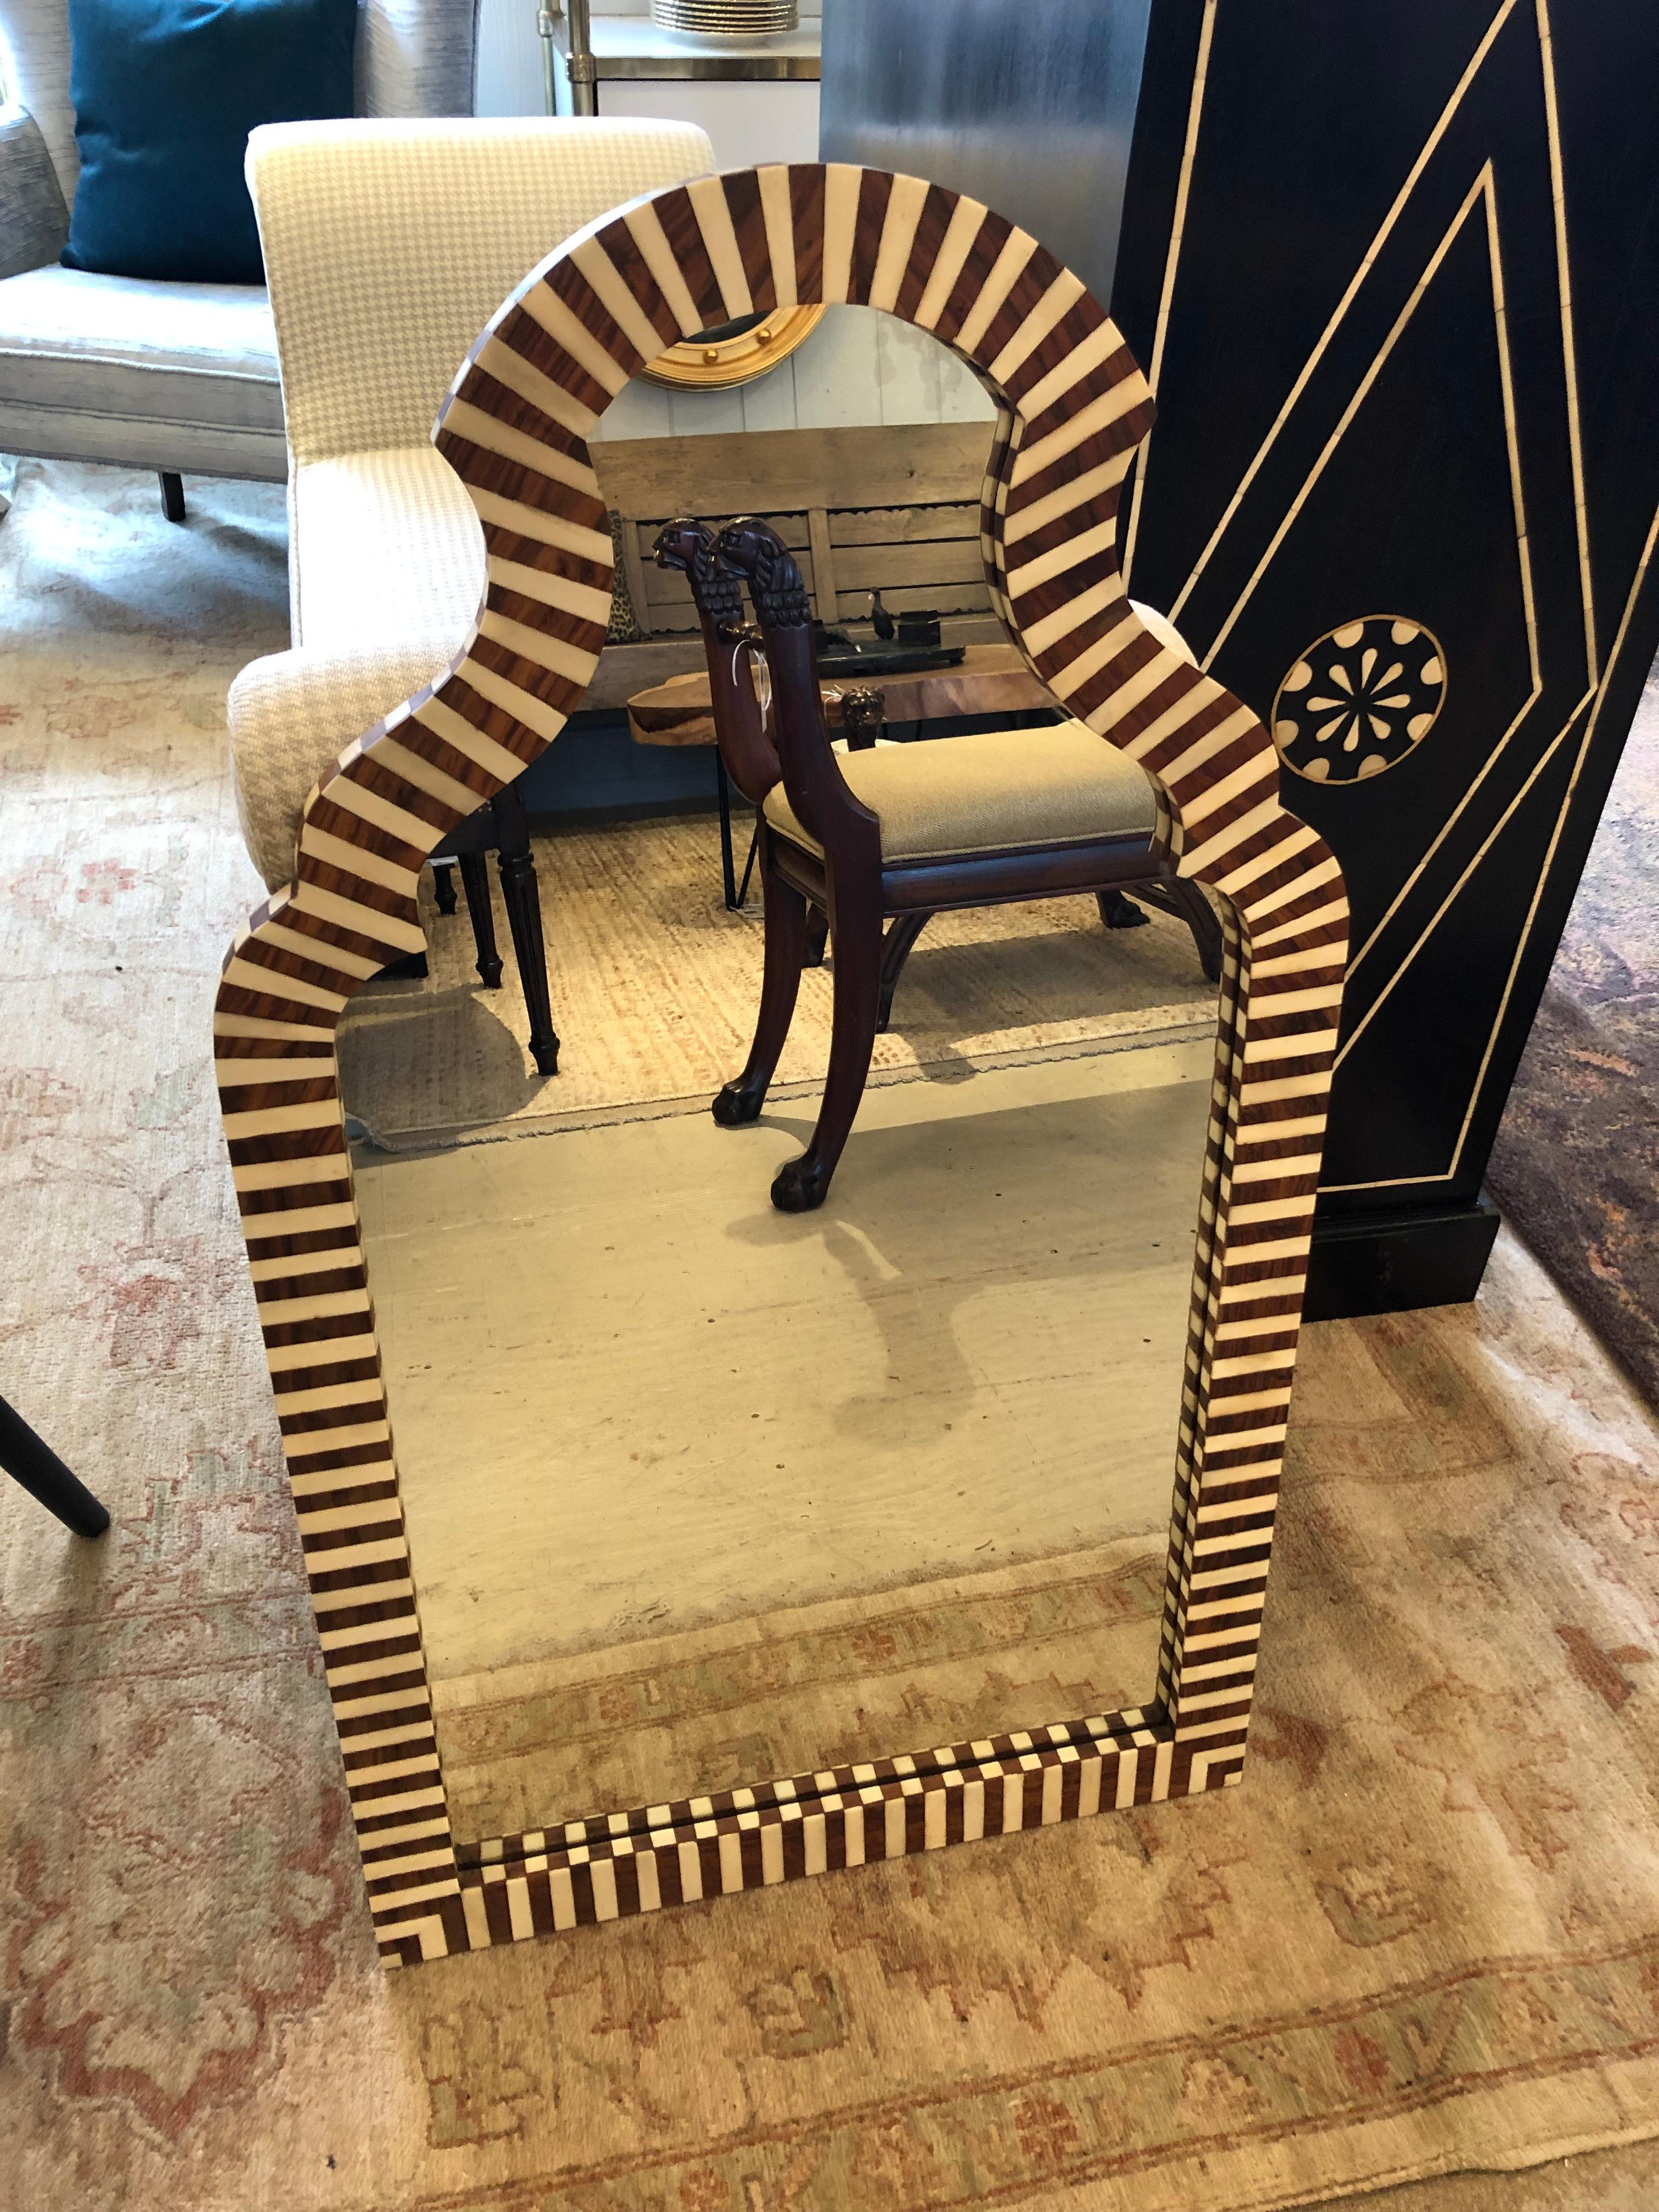 Eye catching graphic inlaid mirror by Made Goods having wonderful sculpted shape and alternating lines of rosewood veneer and bone around the frame.  Has a Moroccan vibe.